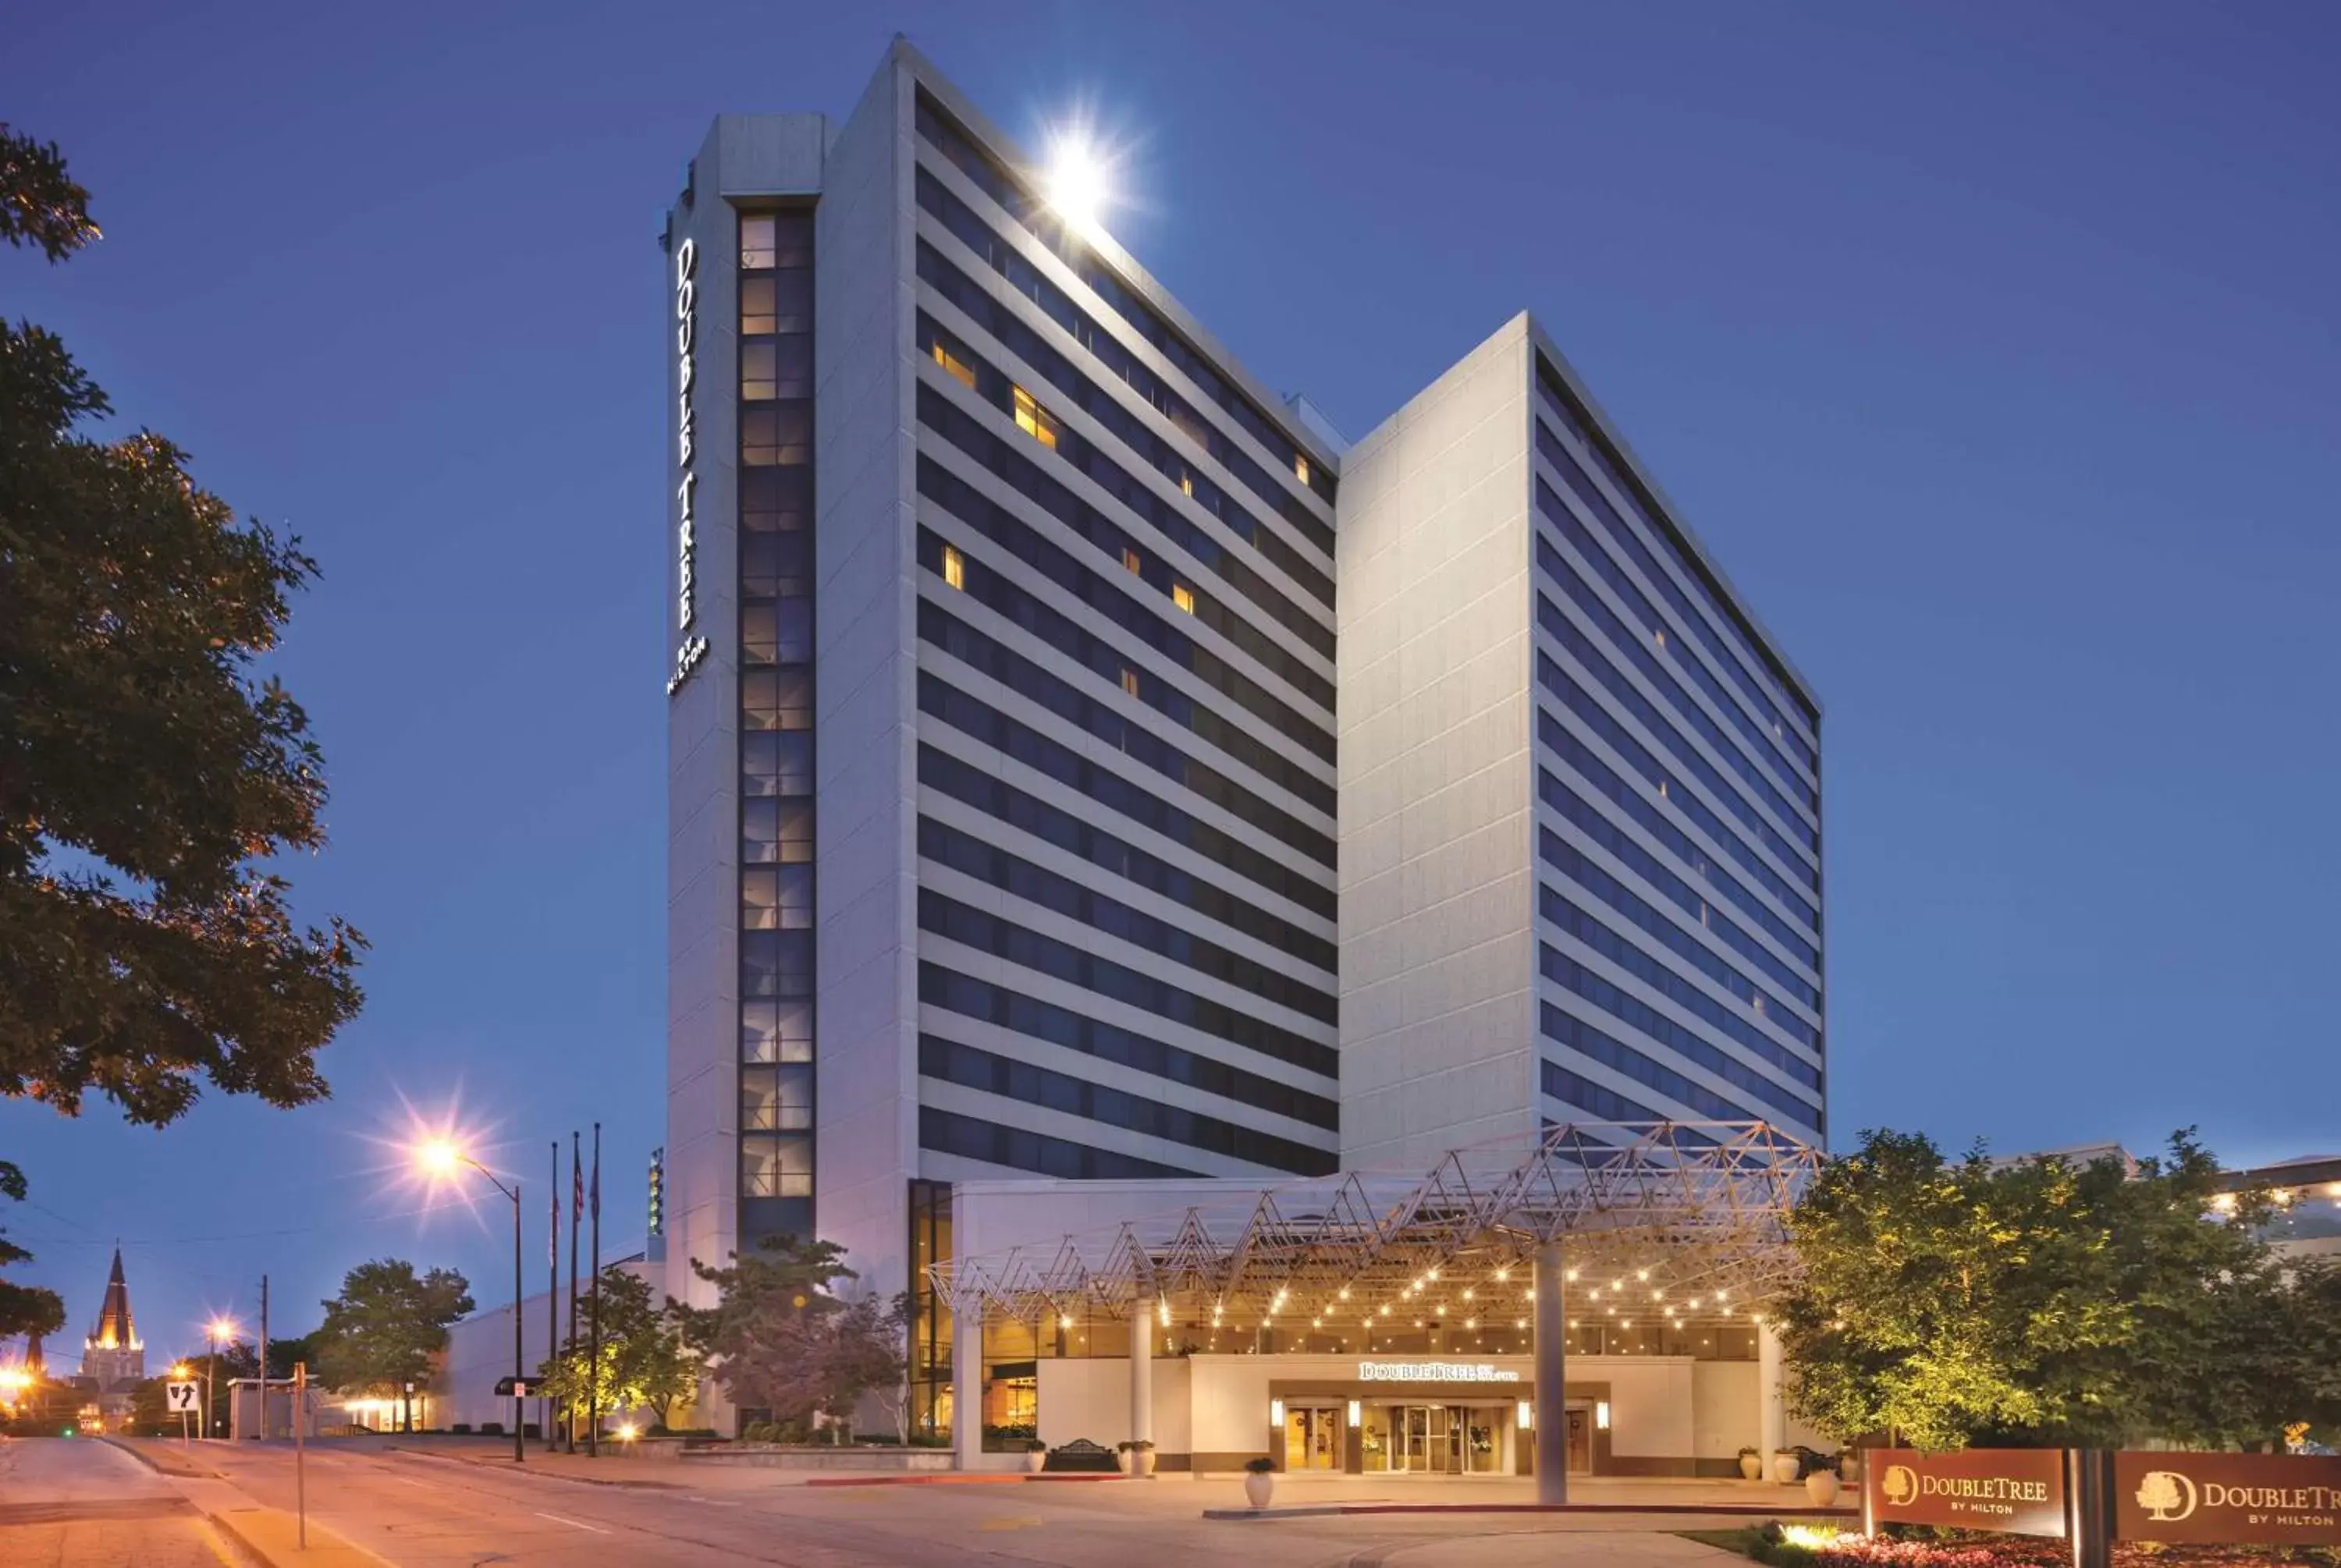 Property Building in DoubleTree by Hilton Tulsa Downtown